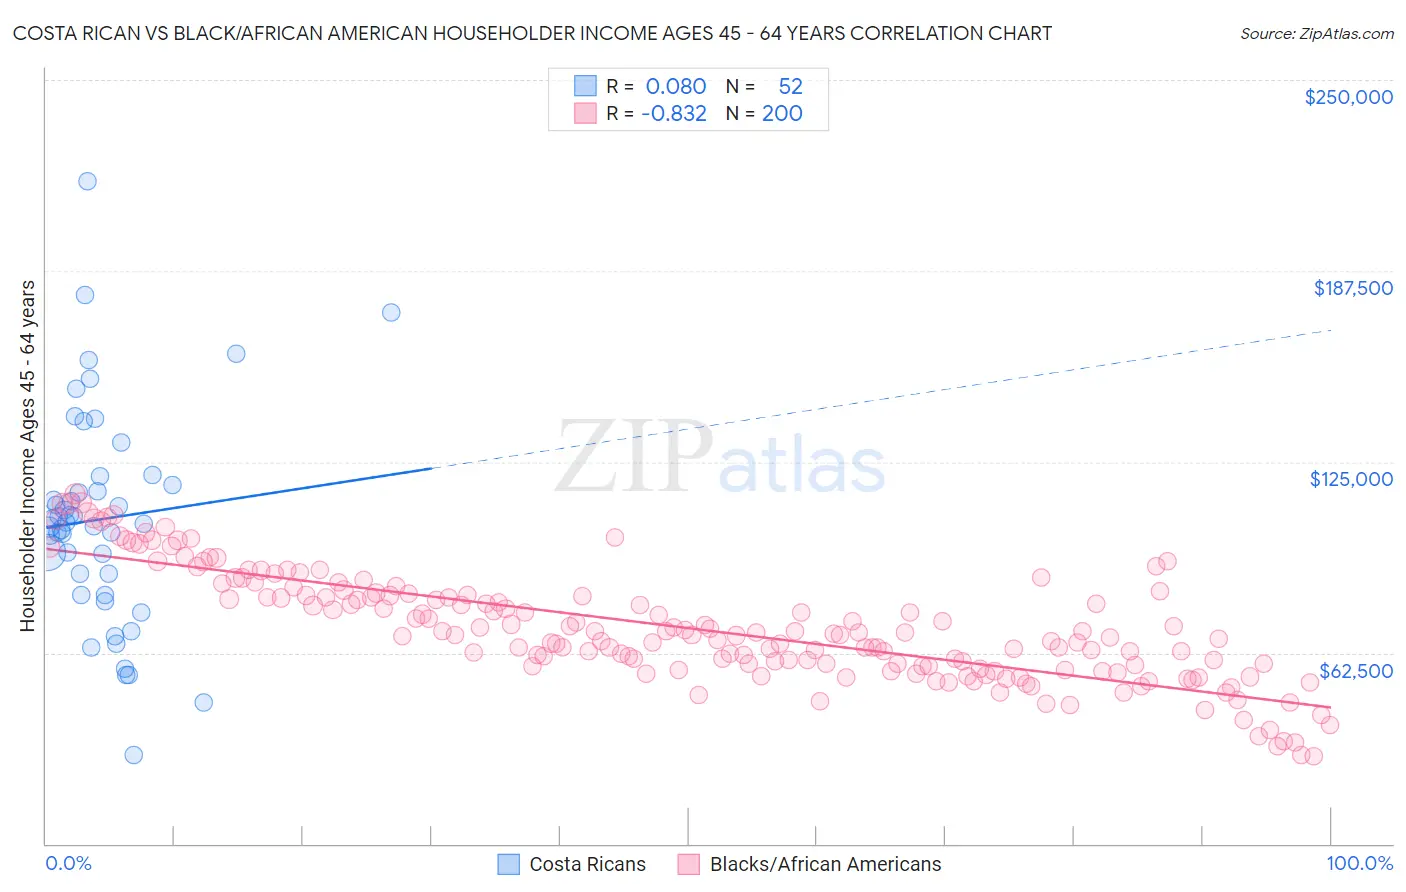 Costa Rican vs Black/African American Householder Income Ages 45 - 64 years